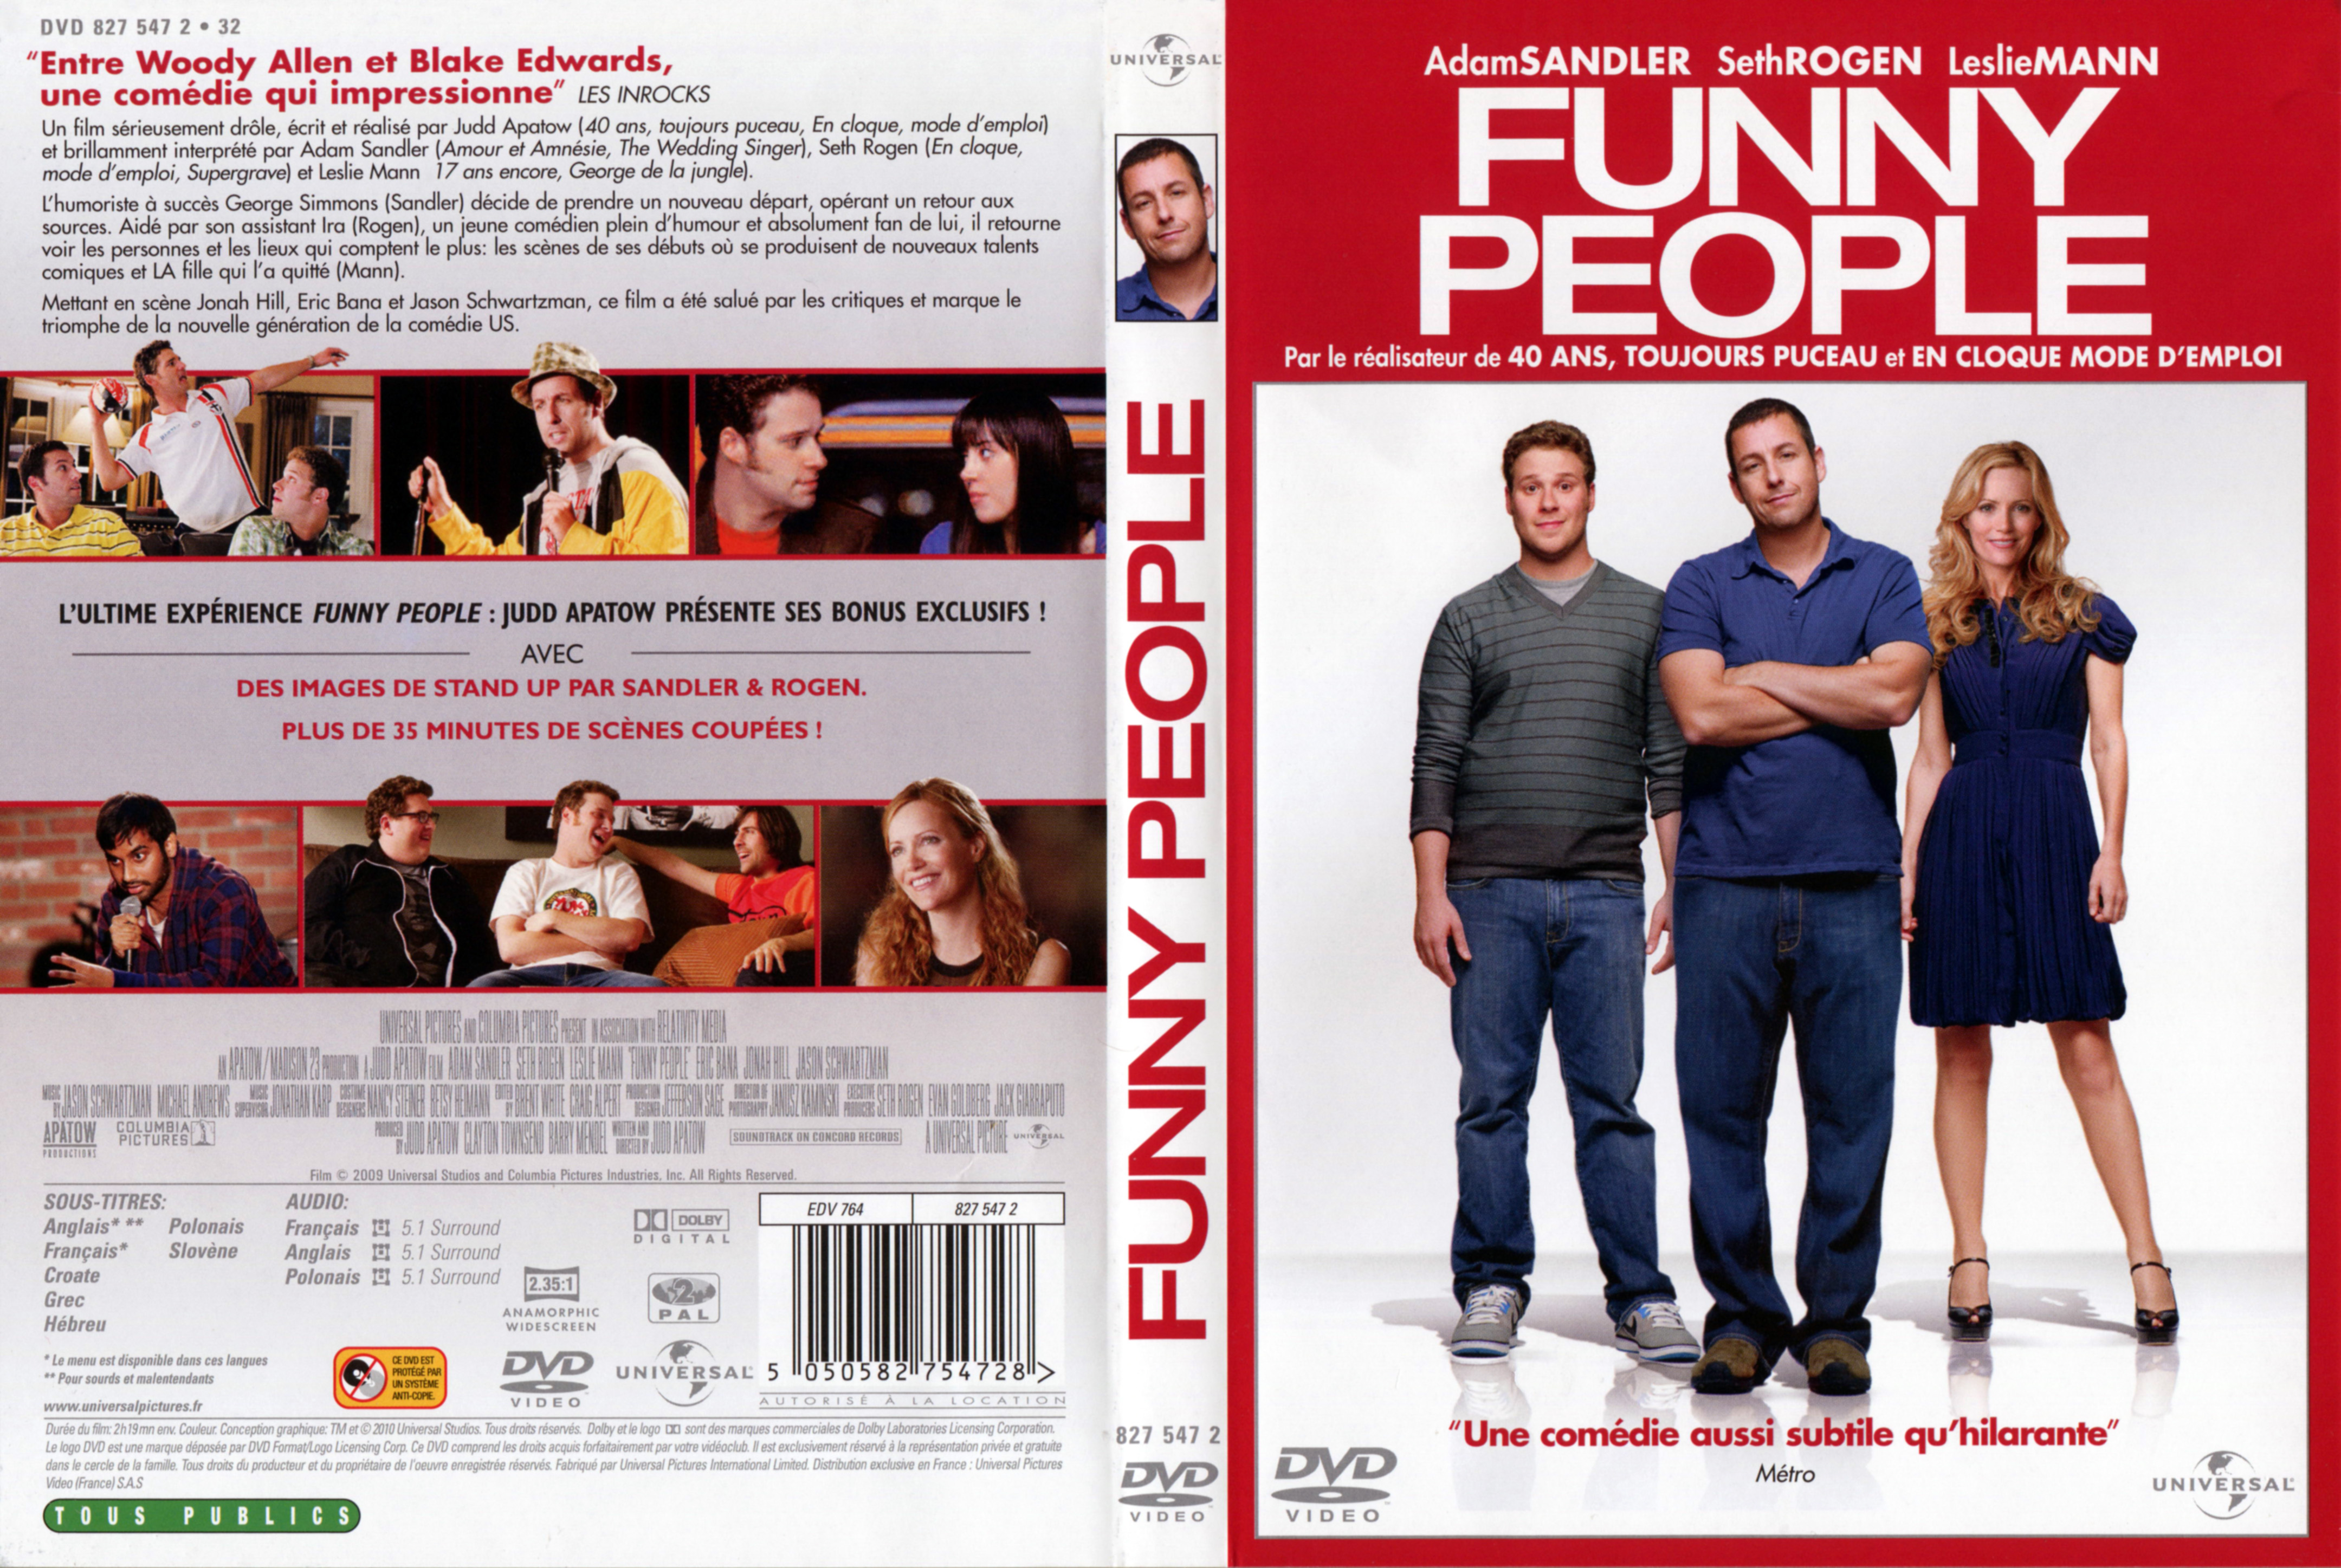 Jaquette DVD Funny people